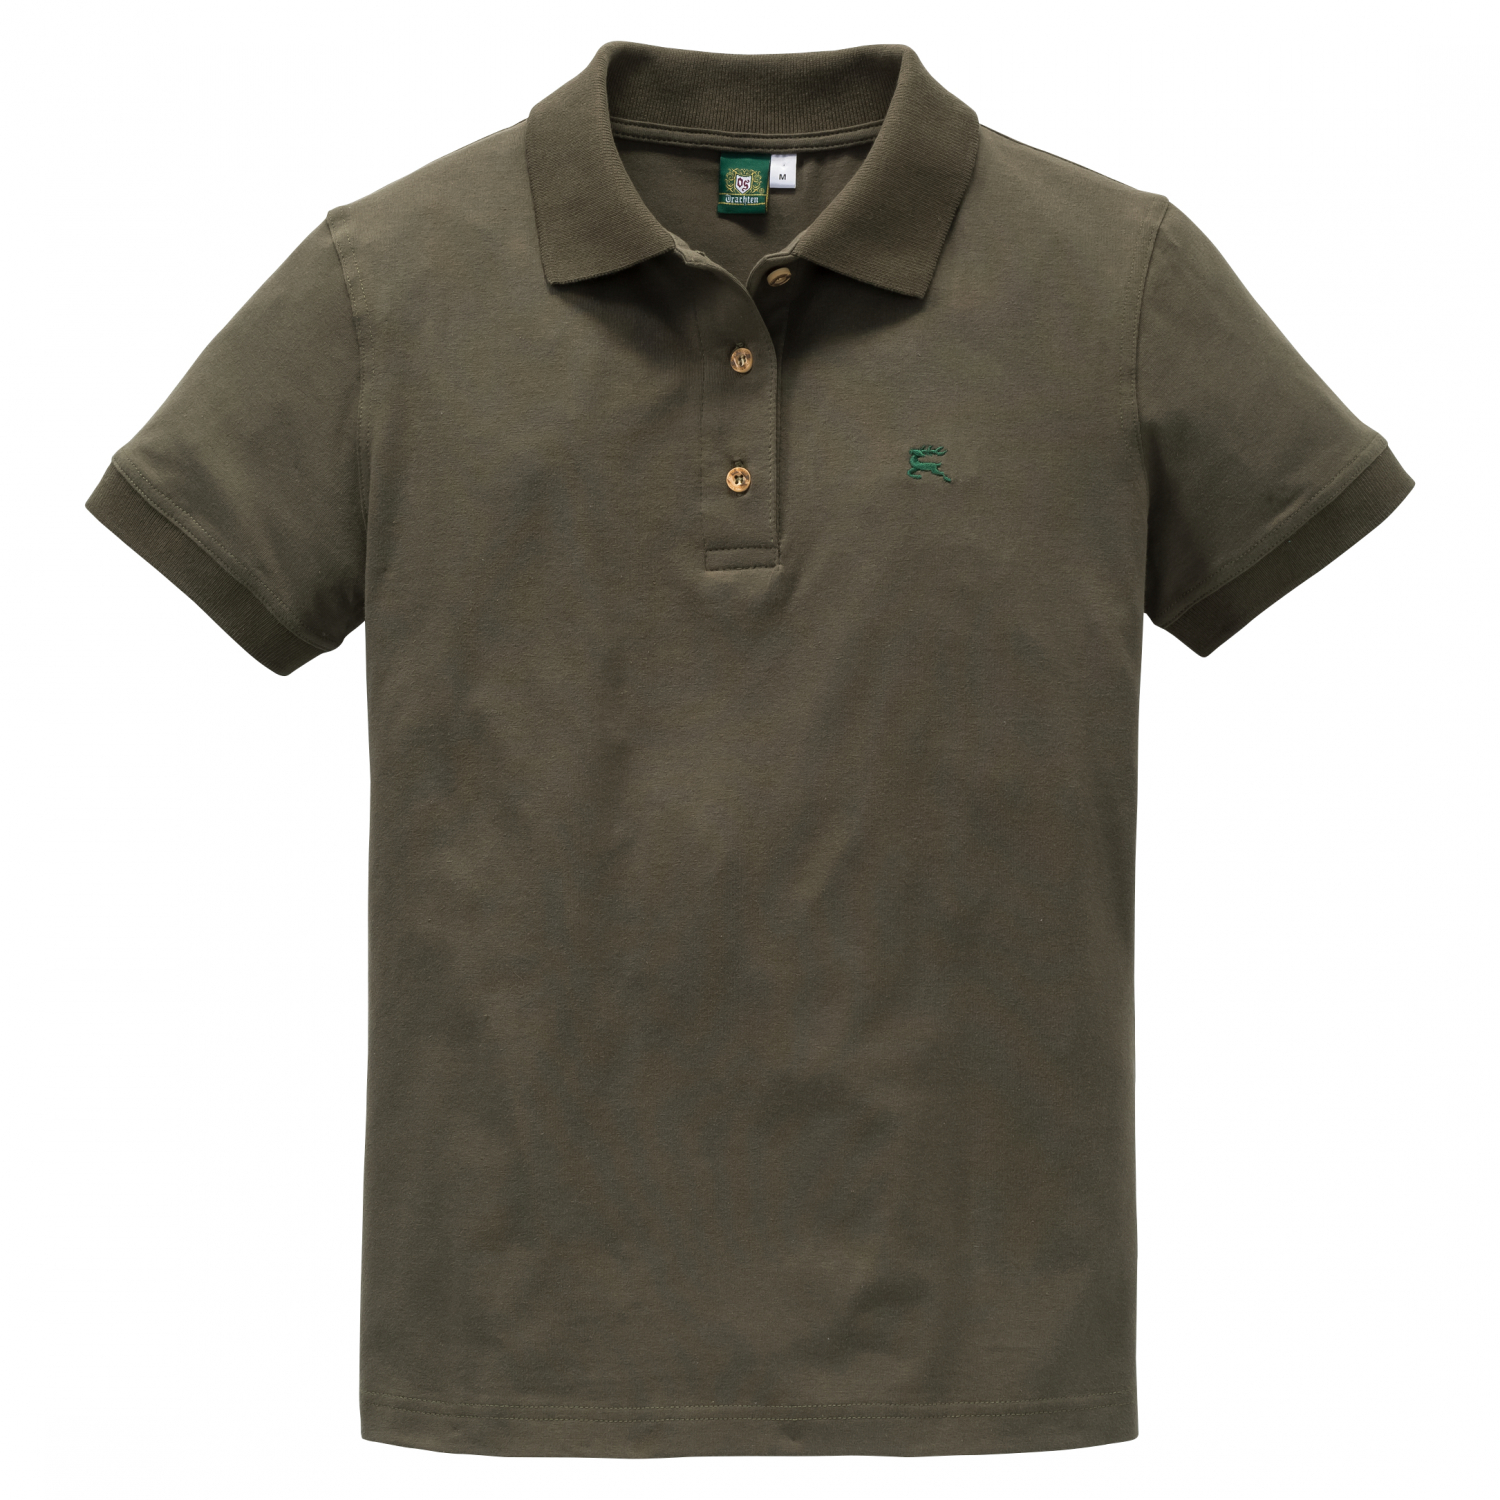 OS Trachten Women's Poloshirt embroided Stag 